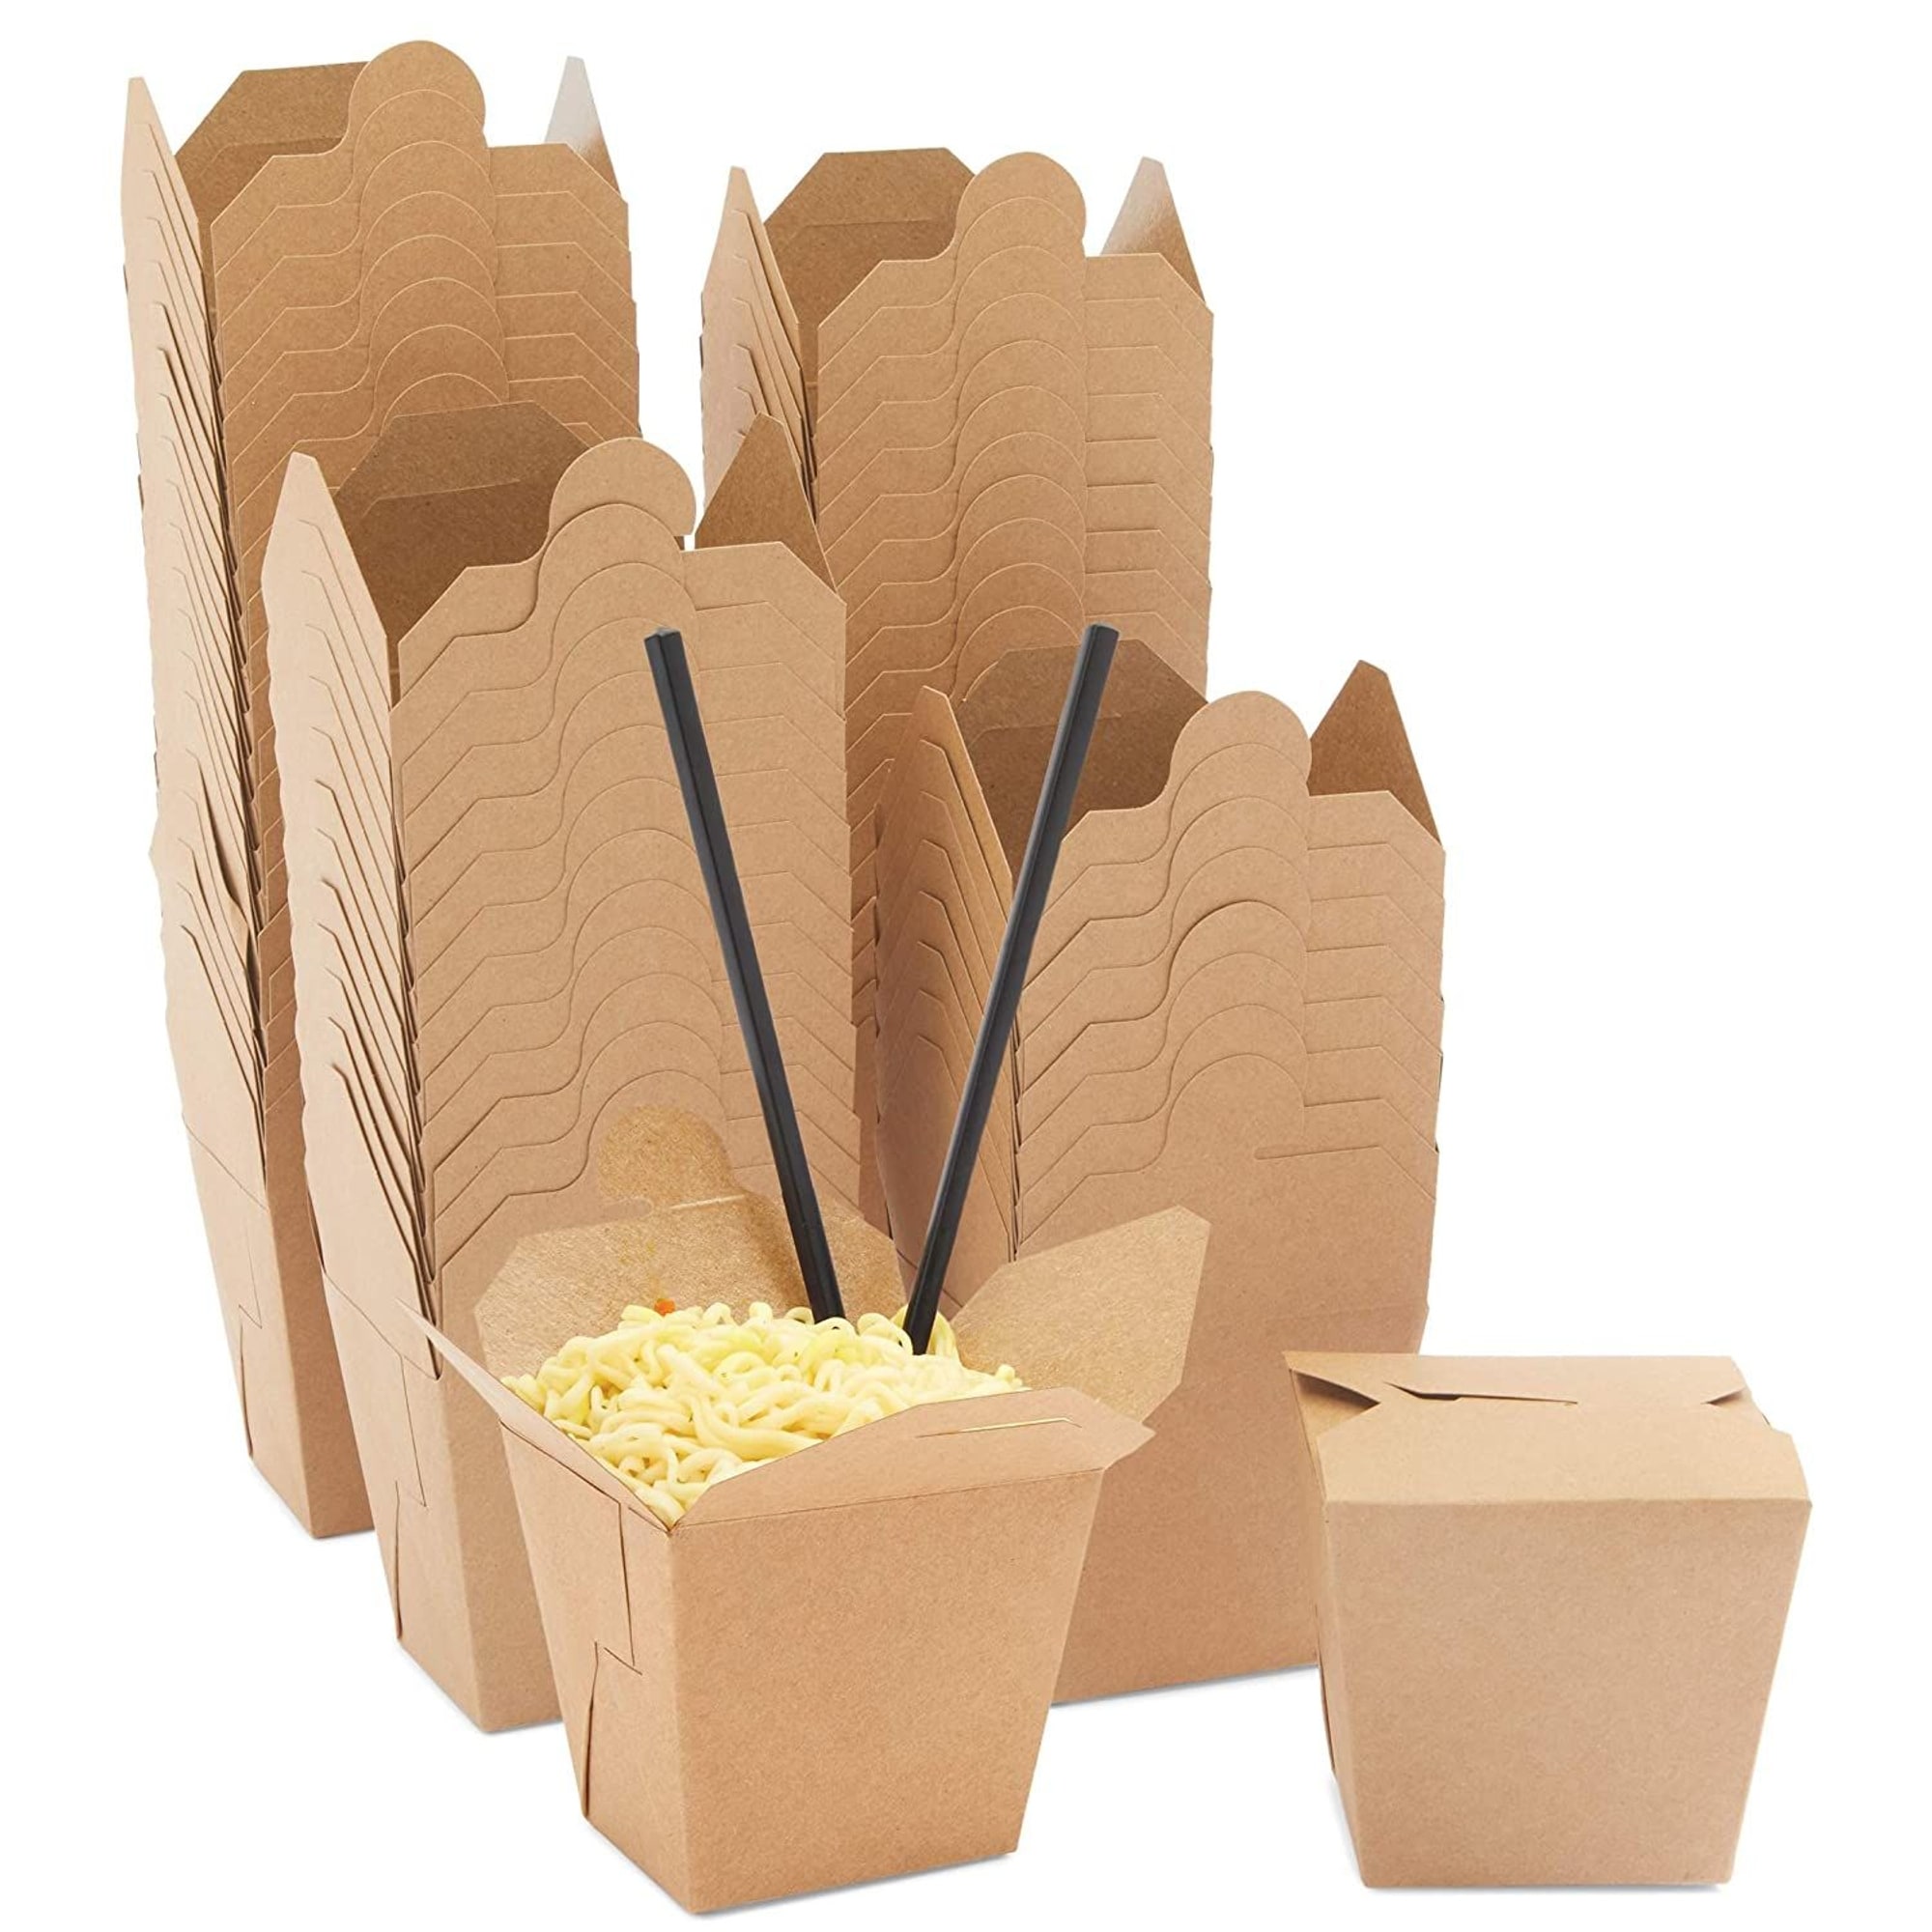 Cardboard Food Containers